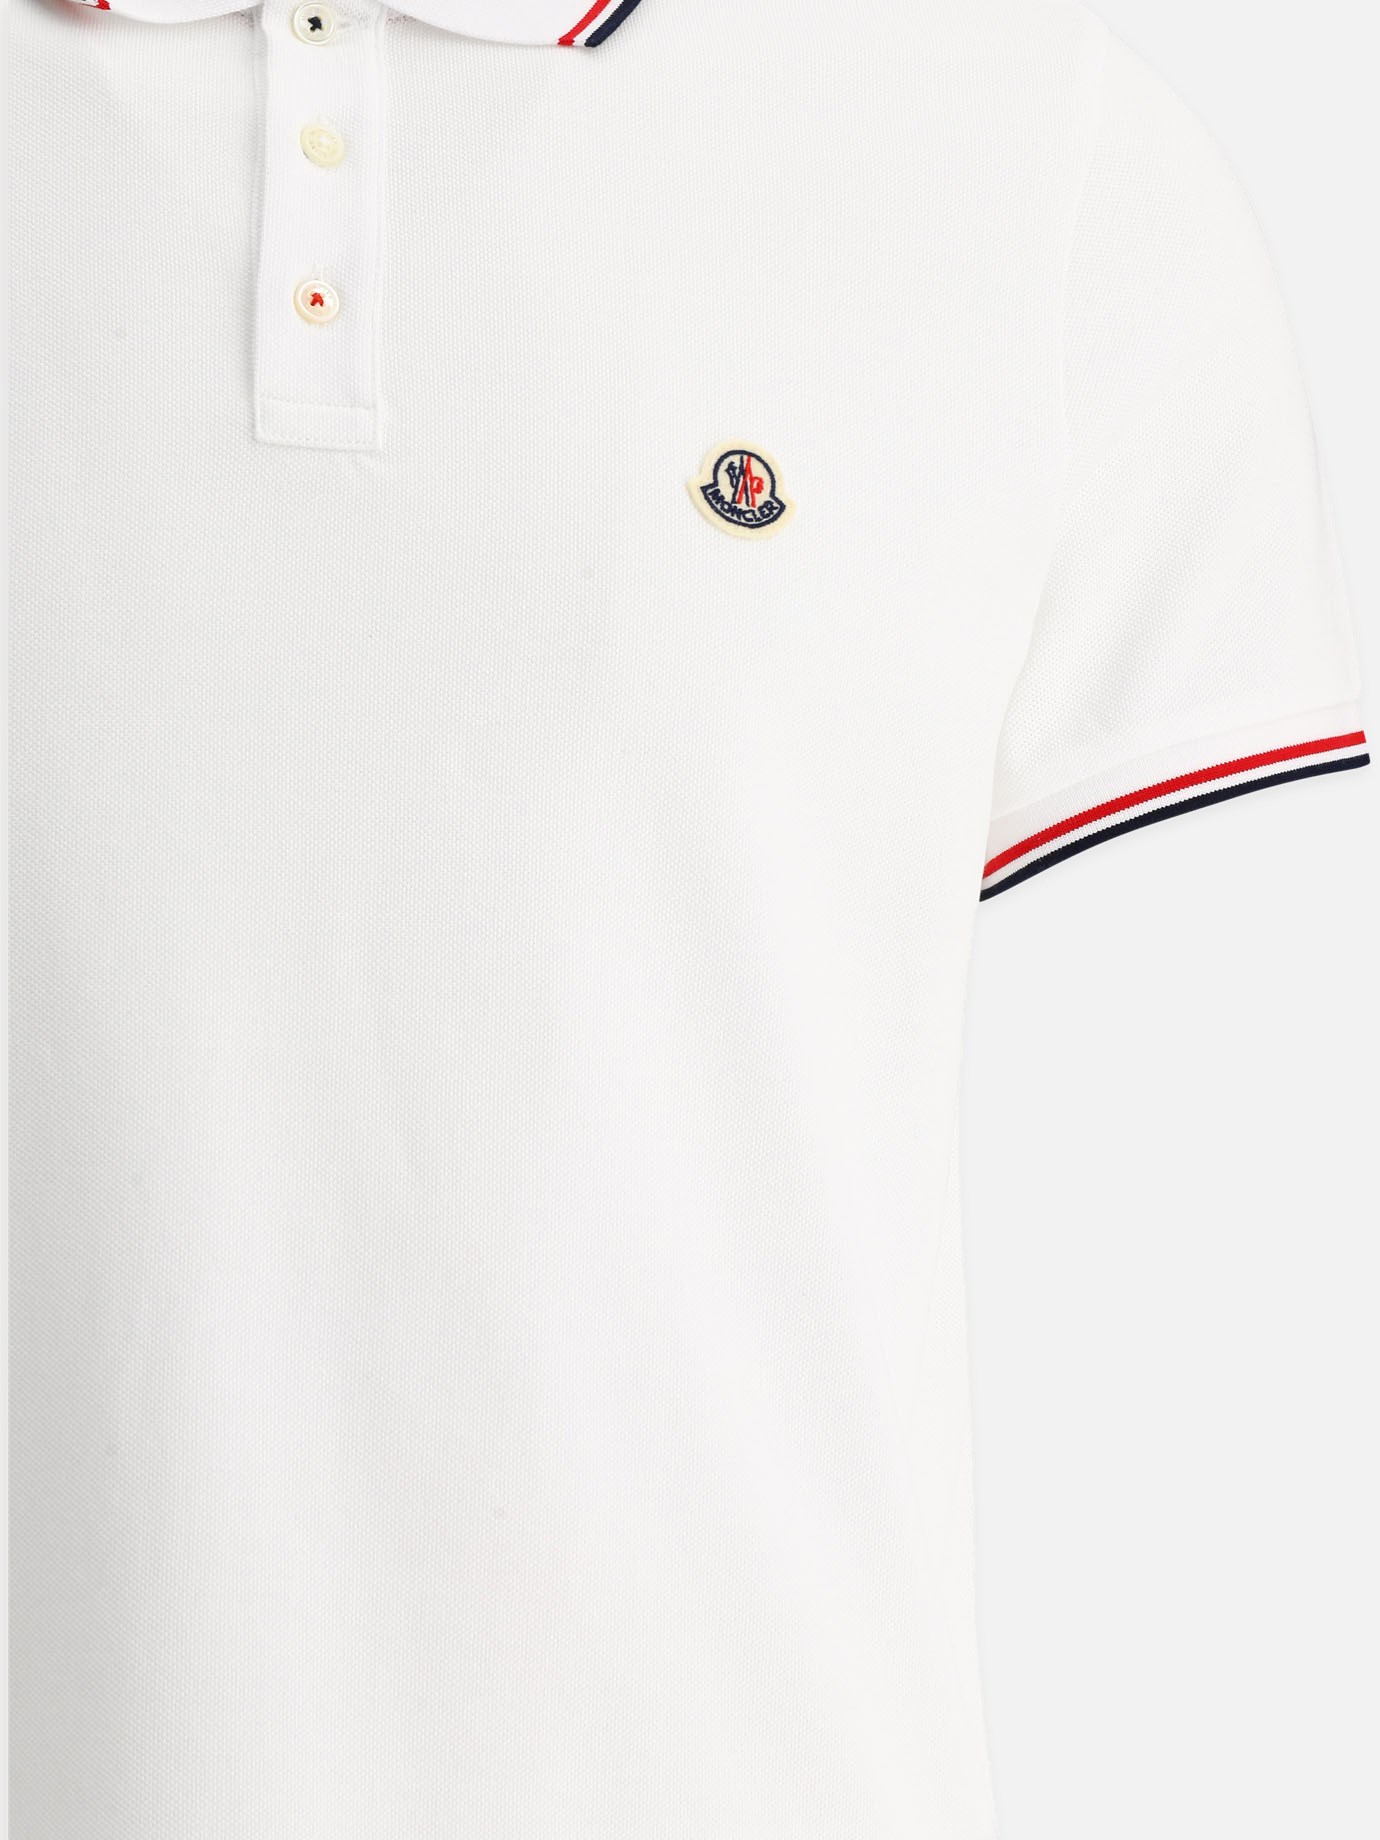 Polo con patch by Moncler